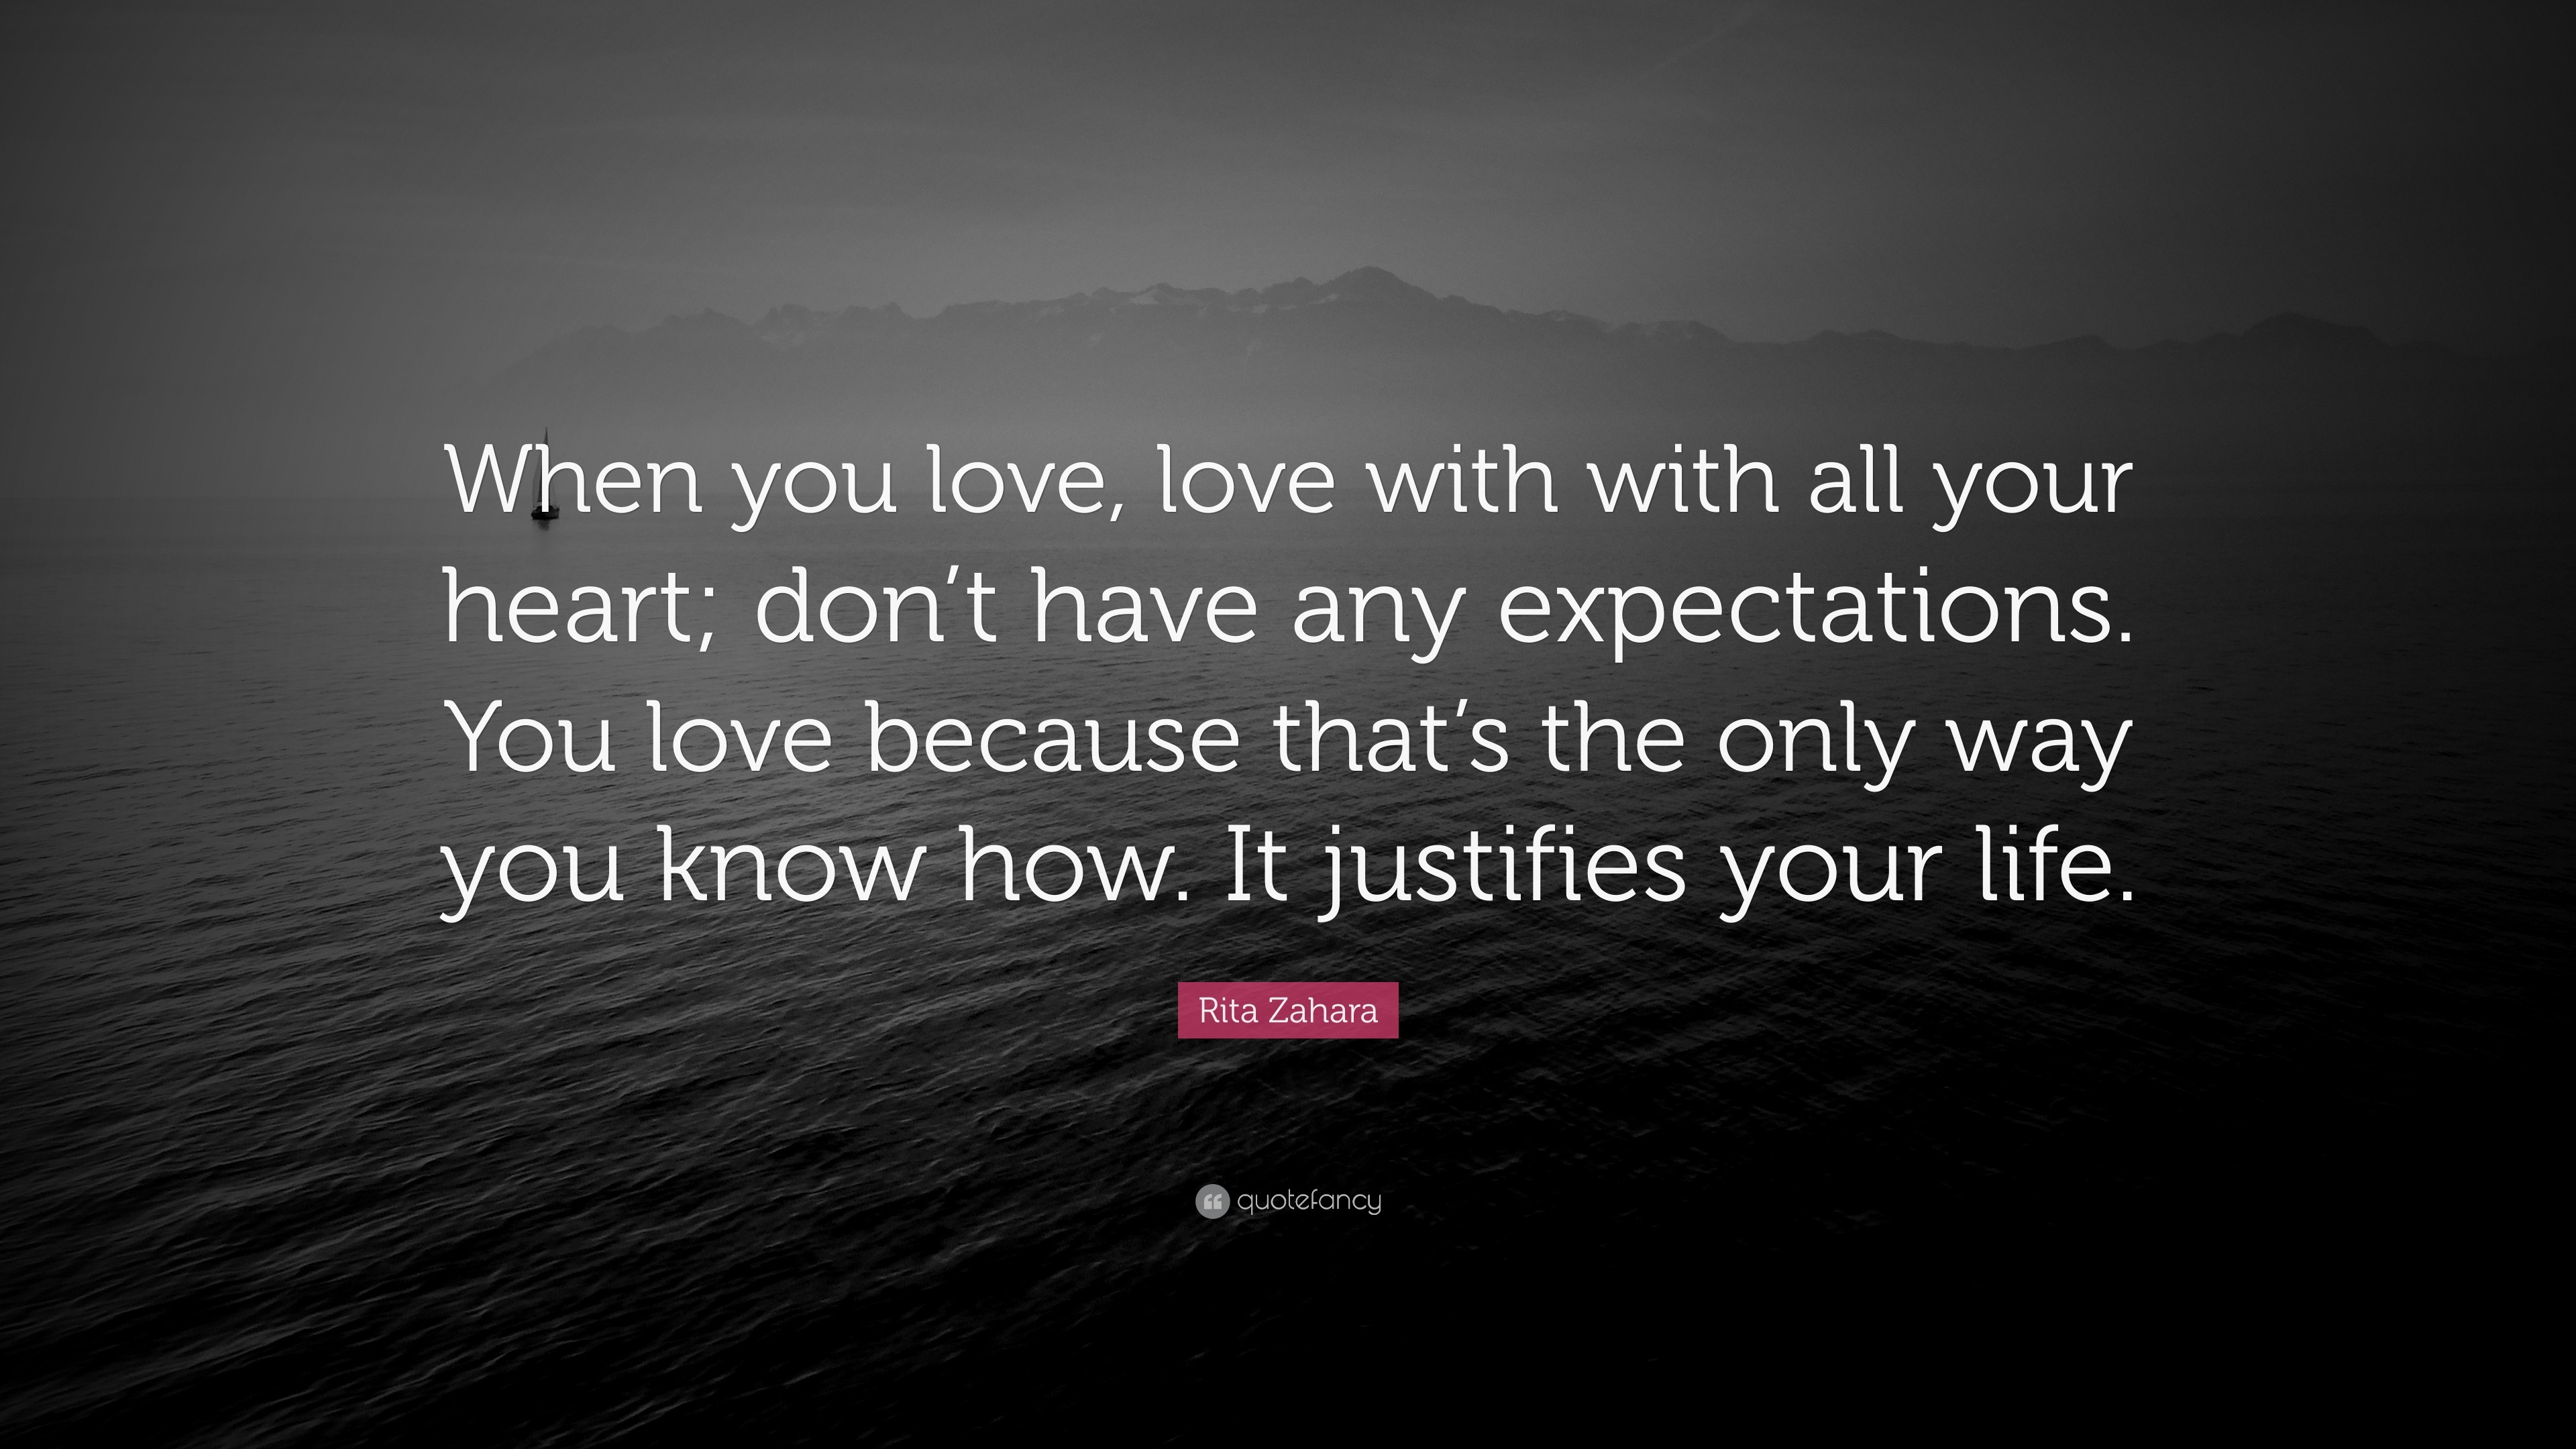 Rita Zahara Quote “When you love love with with all your heart